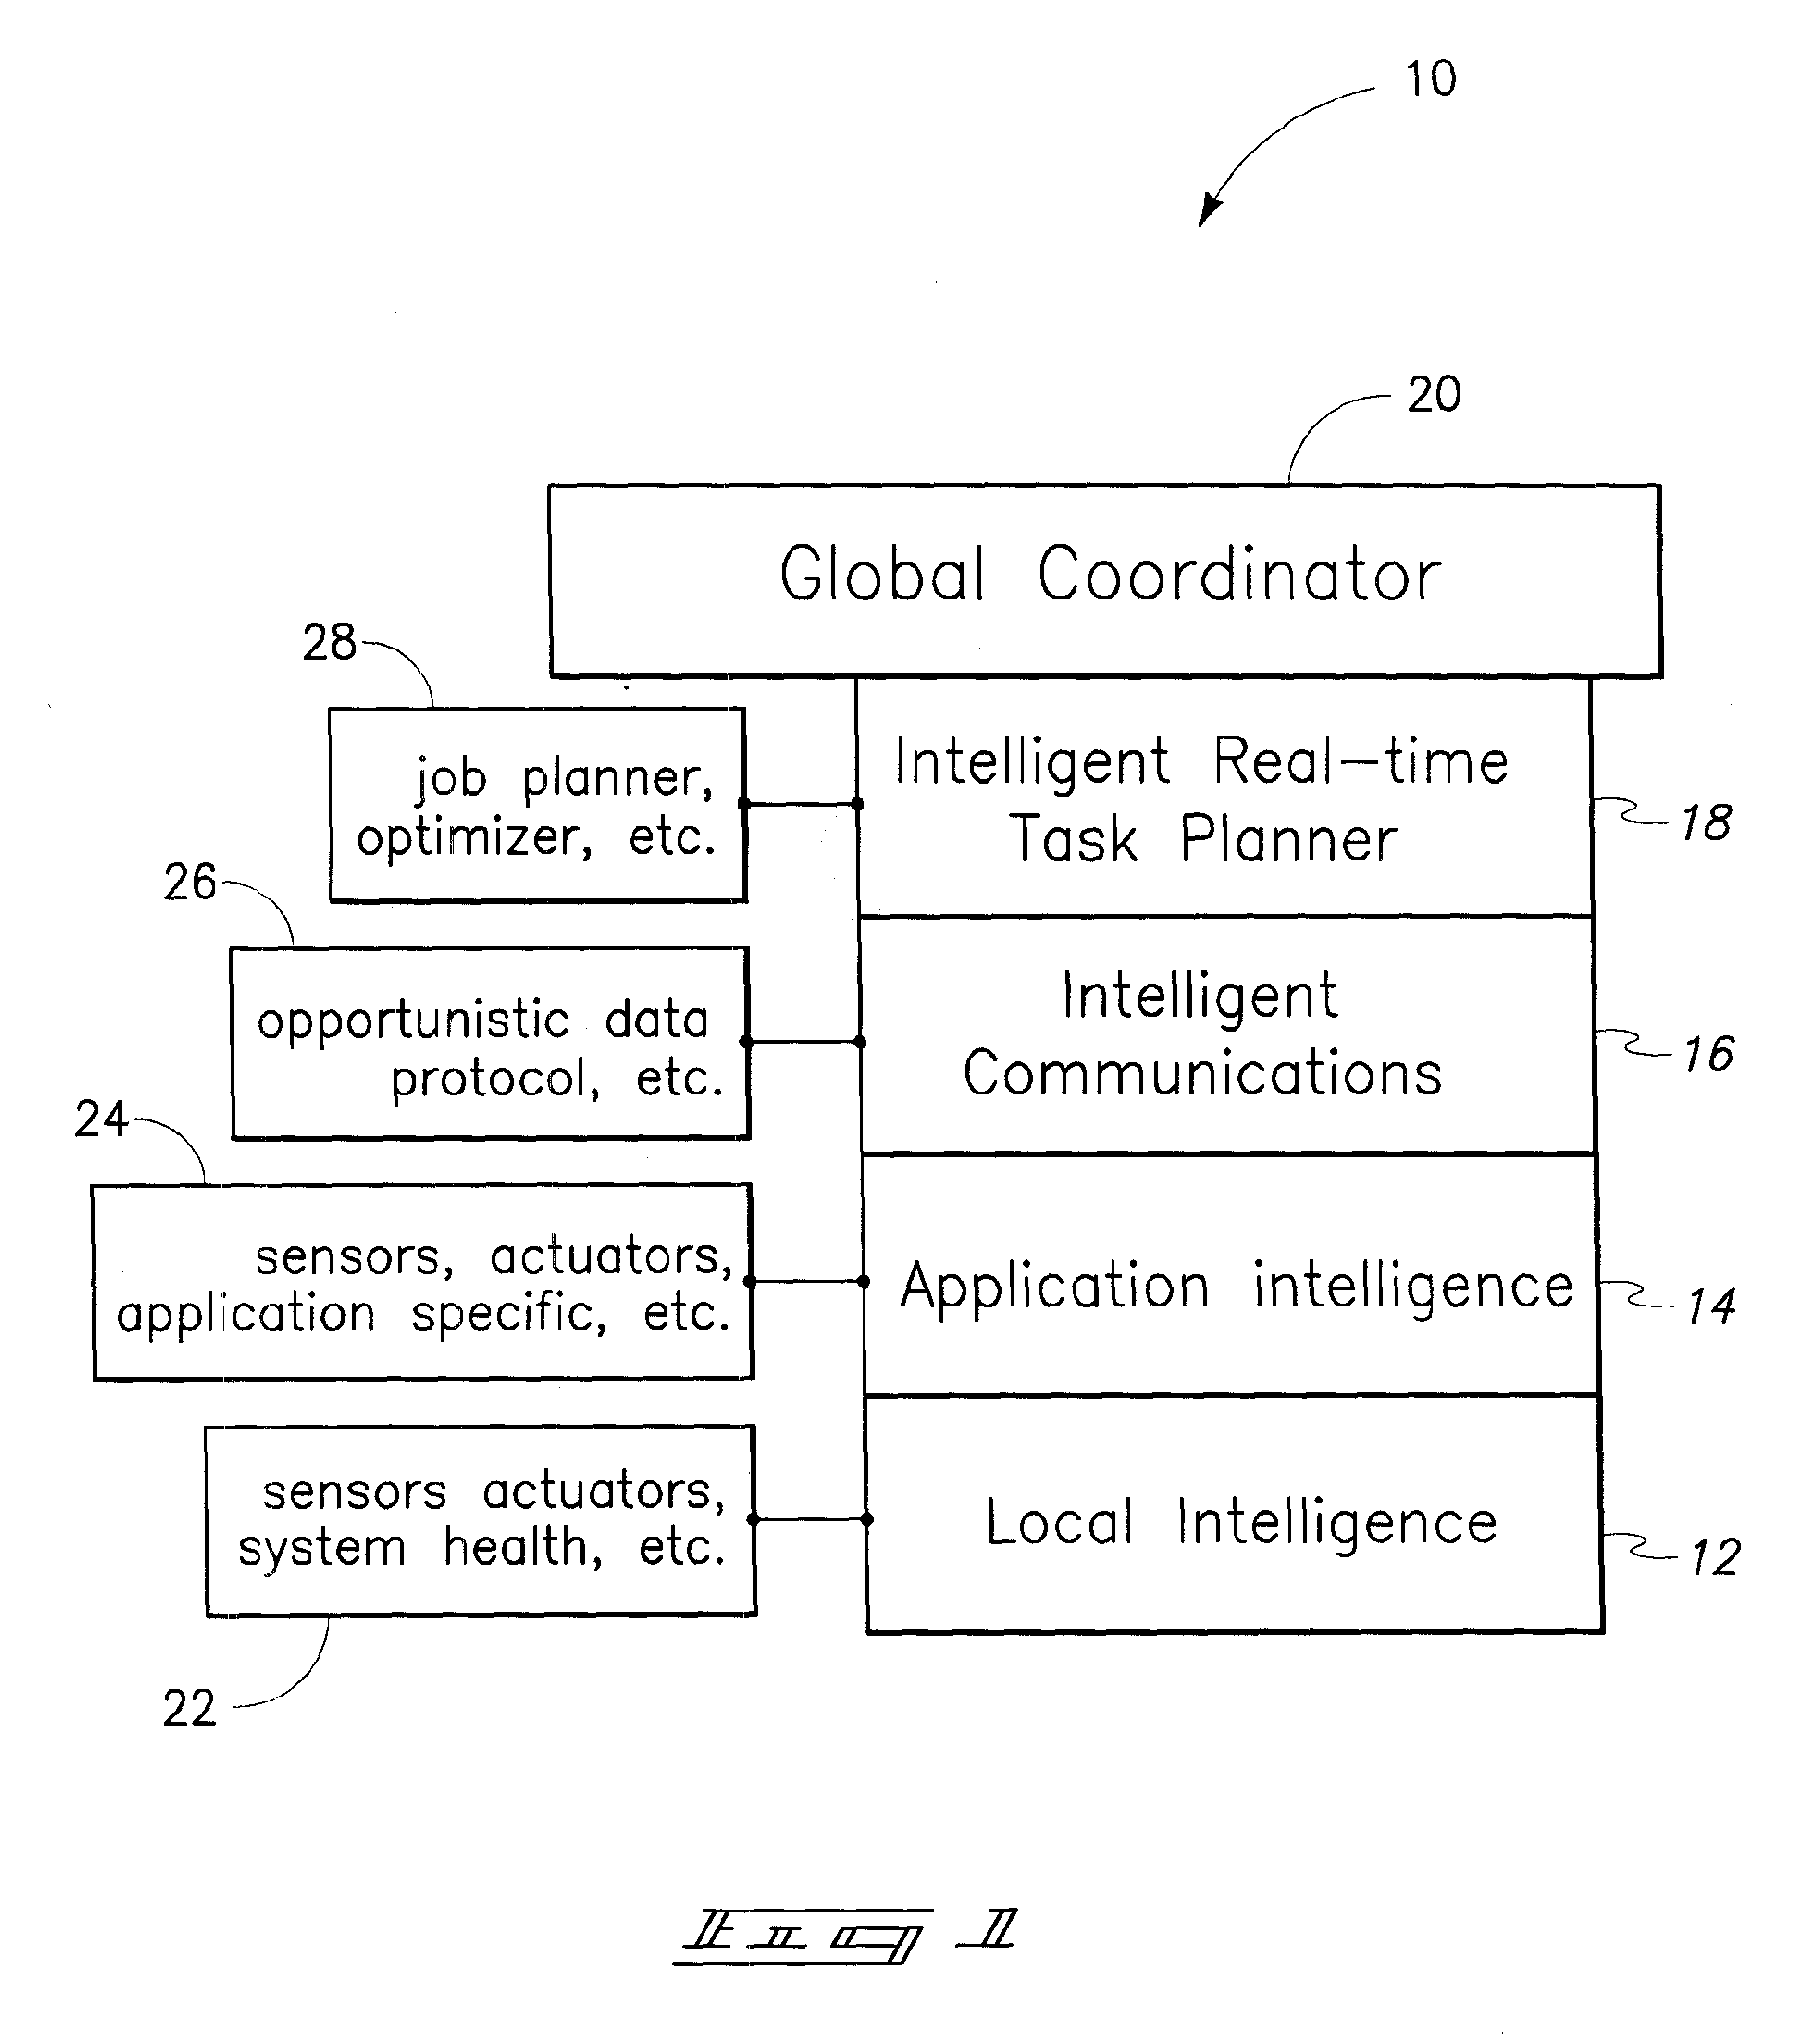 Systems and methods for the autonomous control, automated guidance, and global coordination of moving process machinery